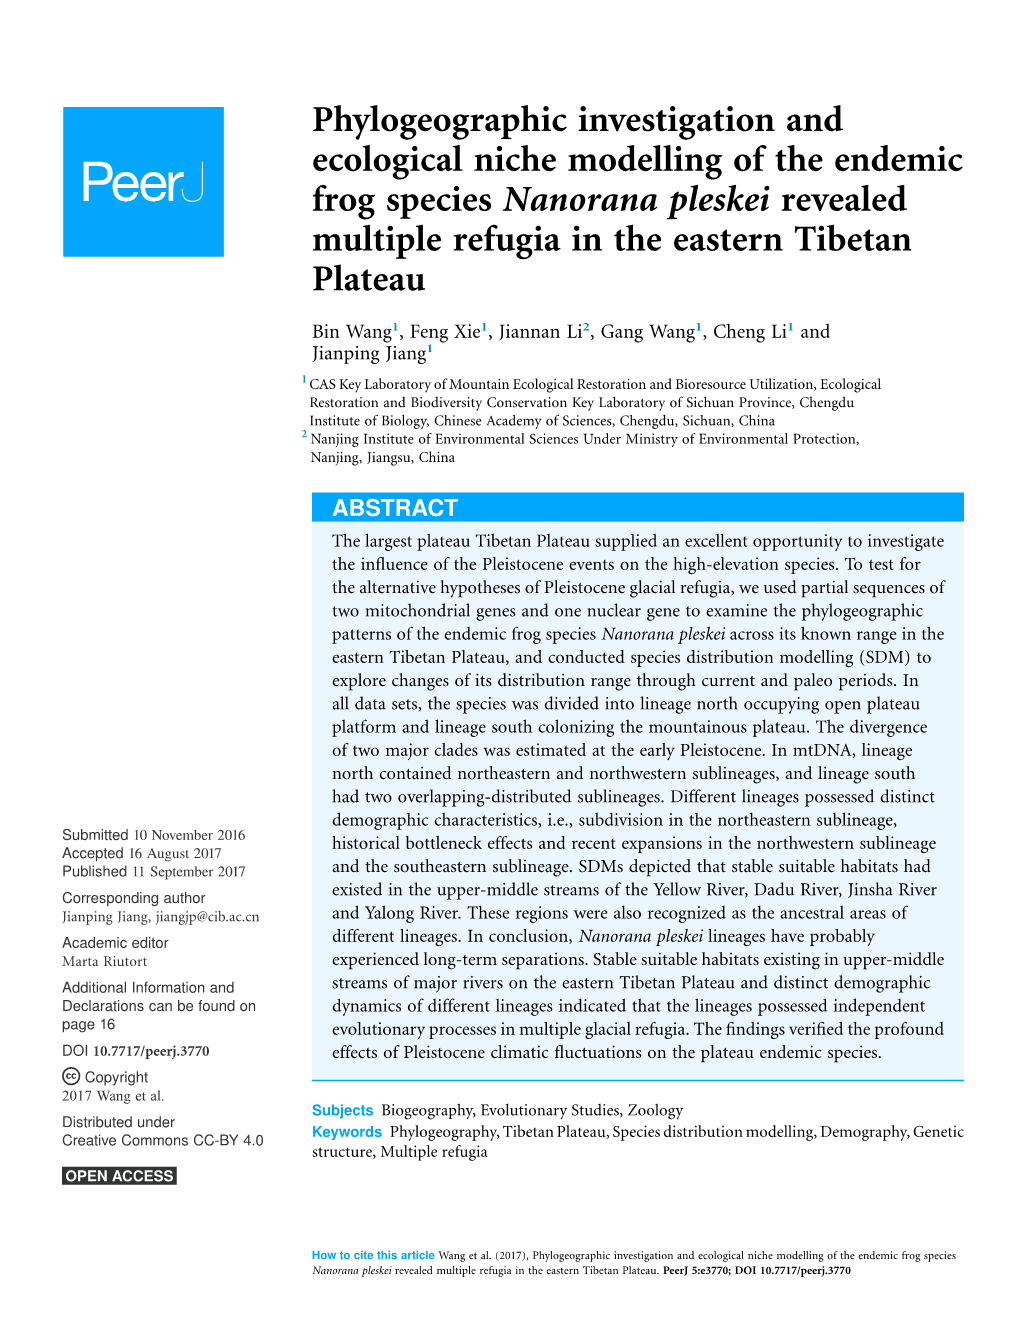 Phylogeographic Investigation and Ecological Niche Modelling of the Endemic Frog Species Nanorana Pleskei Revealed Multiple Refugia in the Eastern Tibetan Plateau